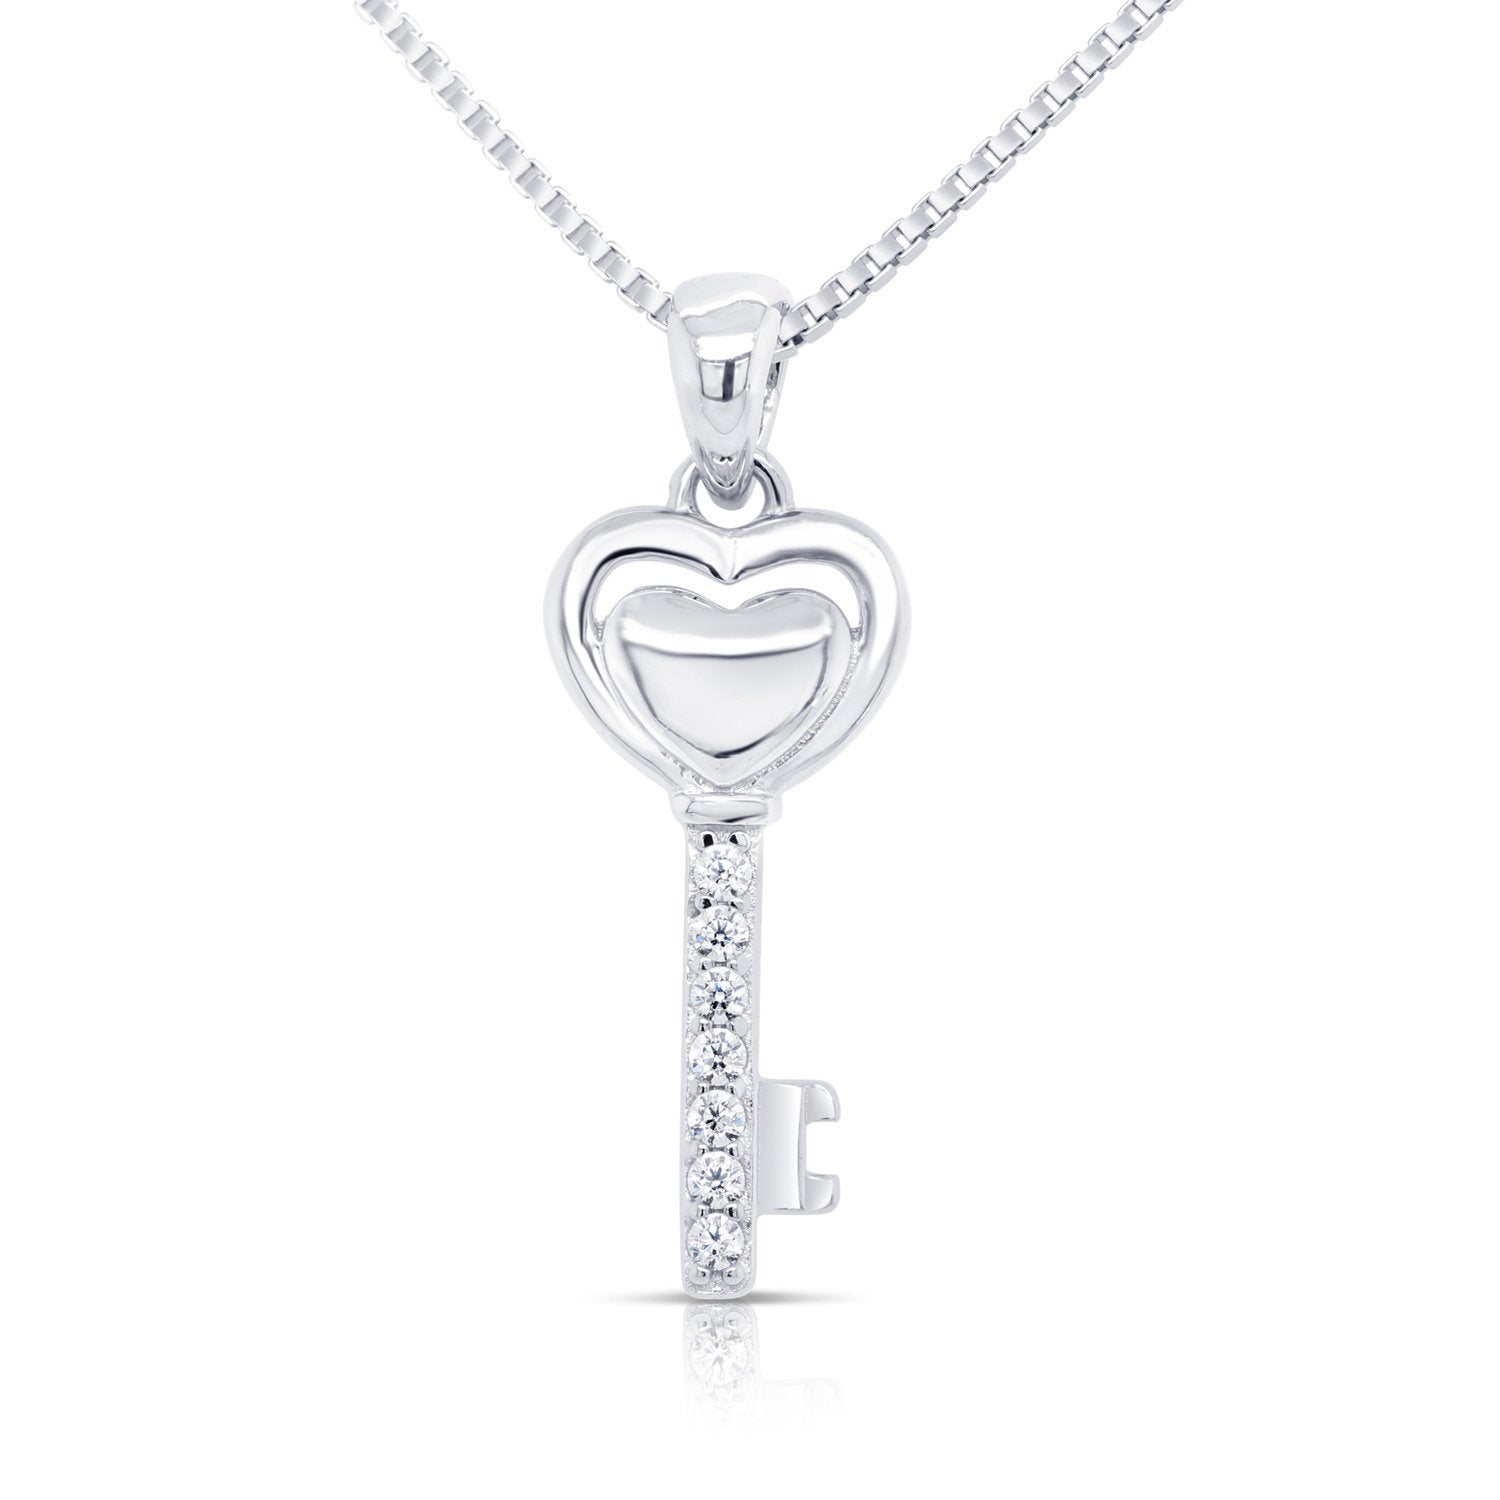 Sterling Silver Heart and Key Charm Necklace